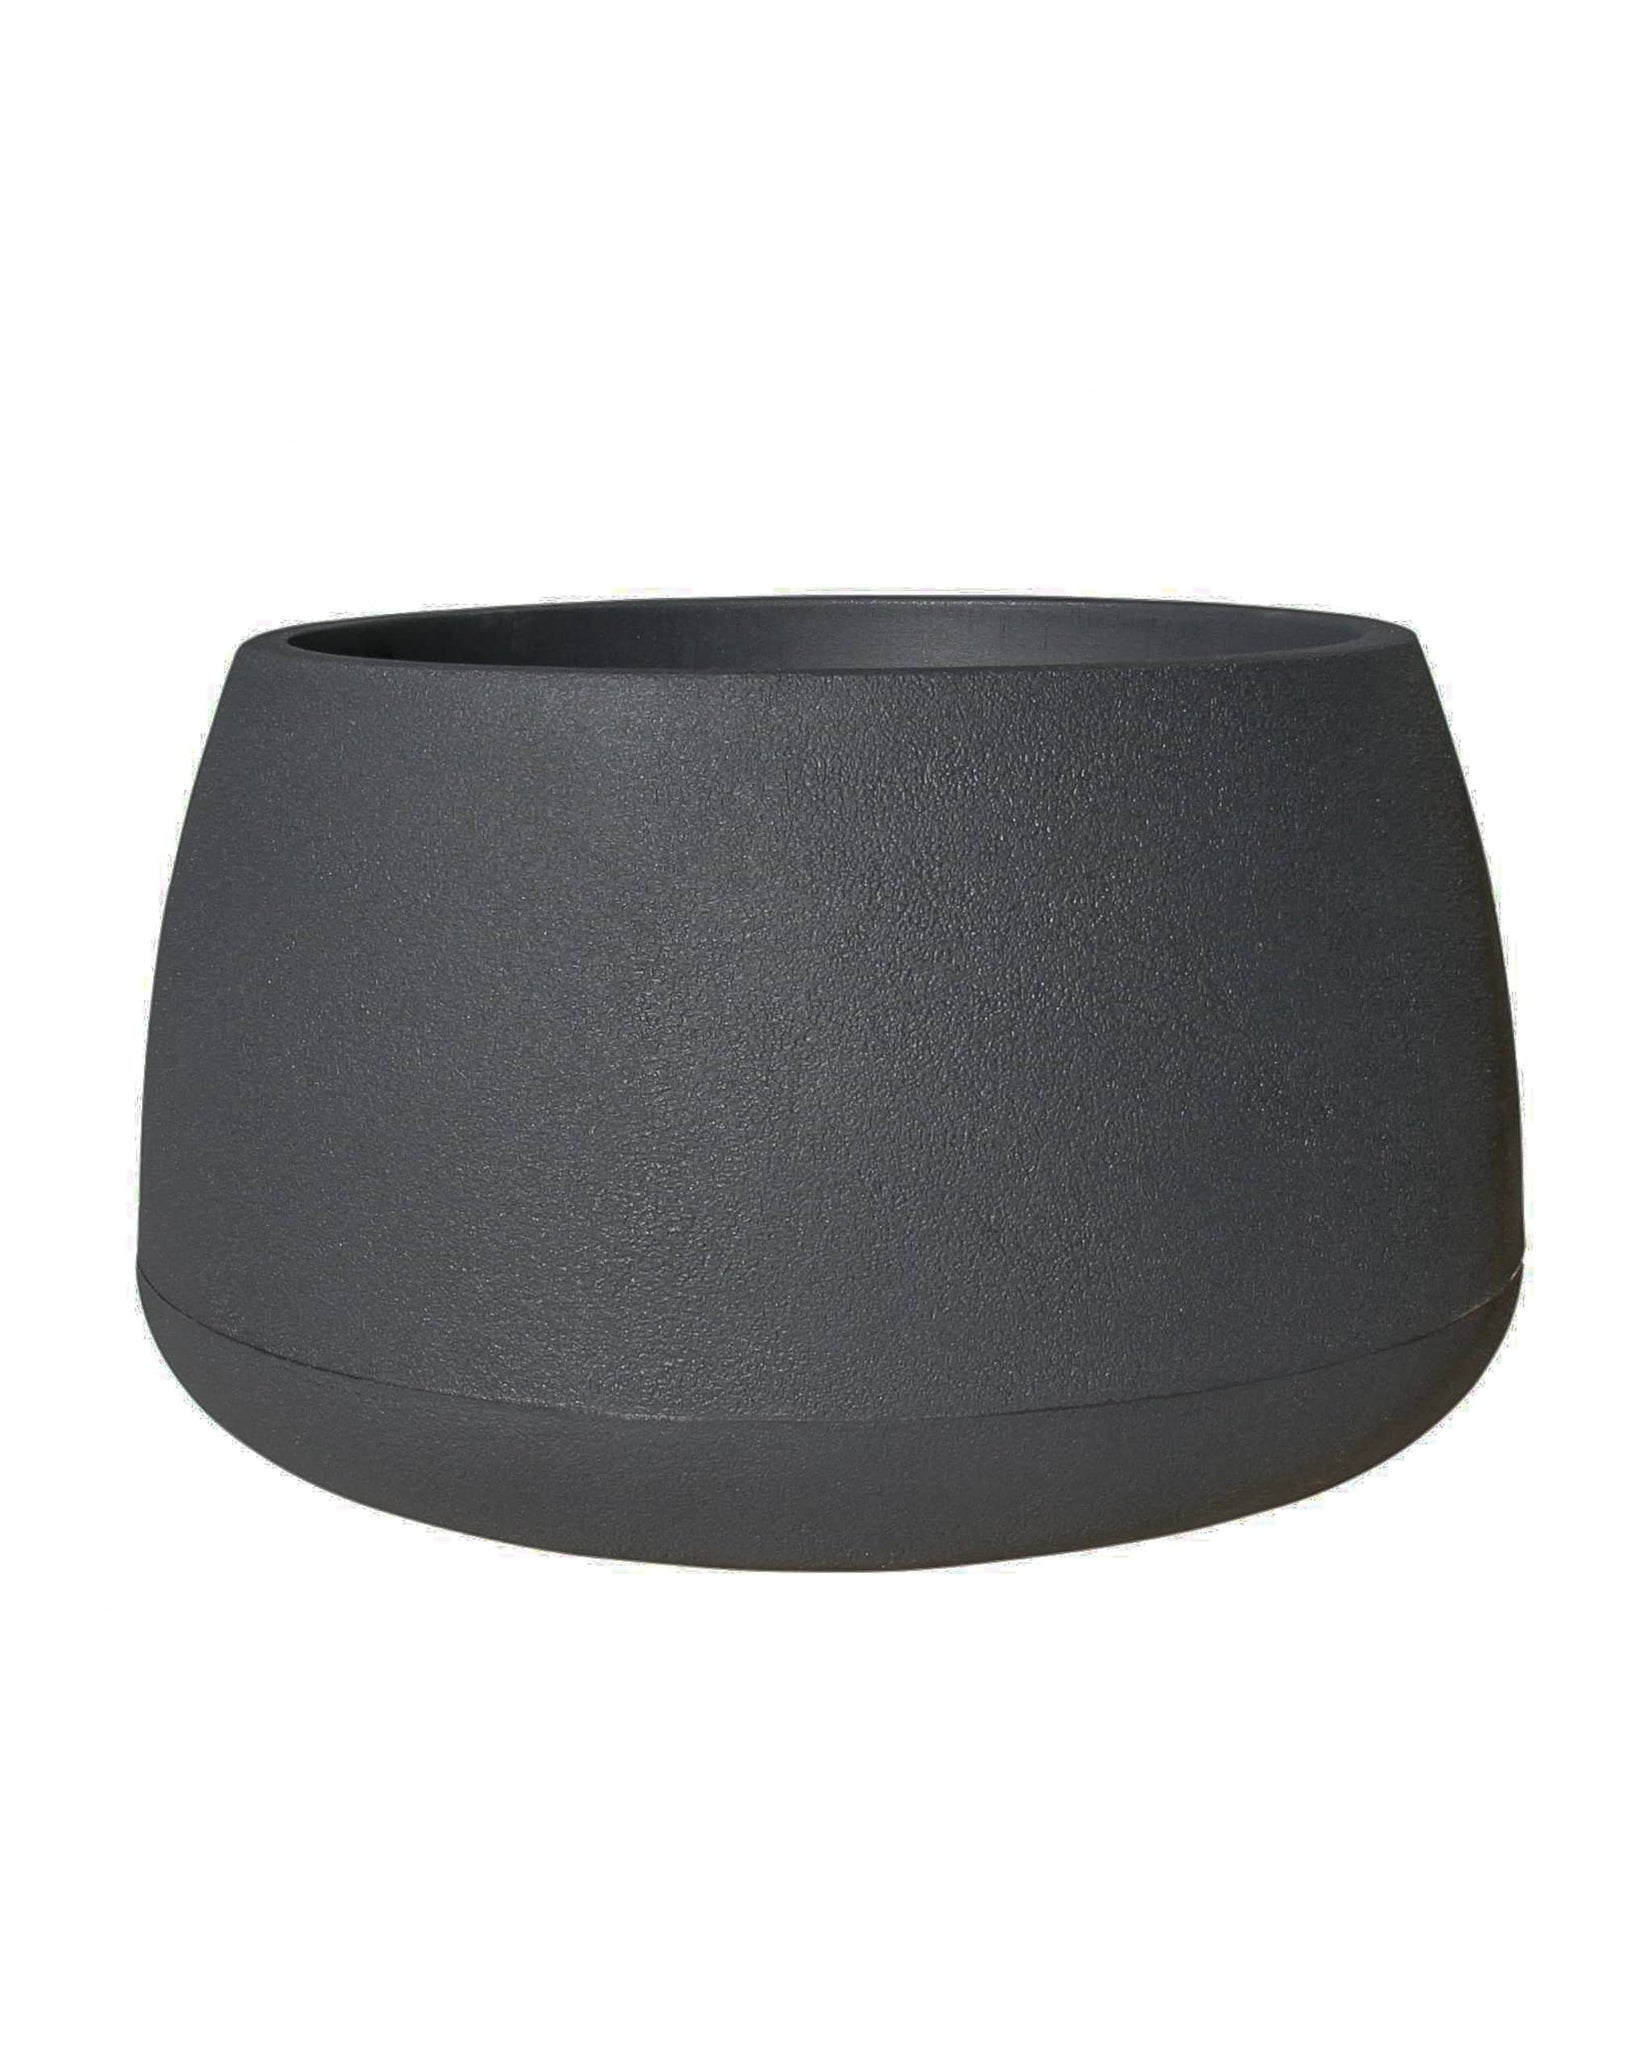 Low rise modern contemporary plant pot with stunning slightly textured finish, and wide neck for planting. Colour Lead (black). Florastyle by Hingham.